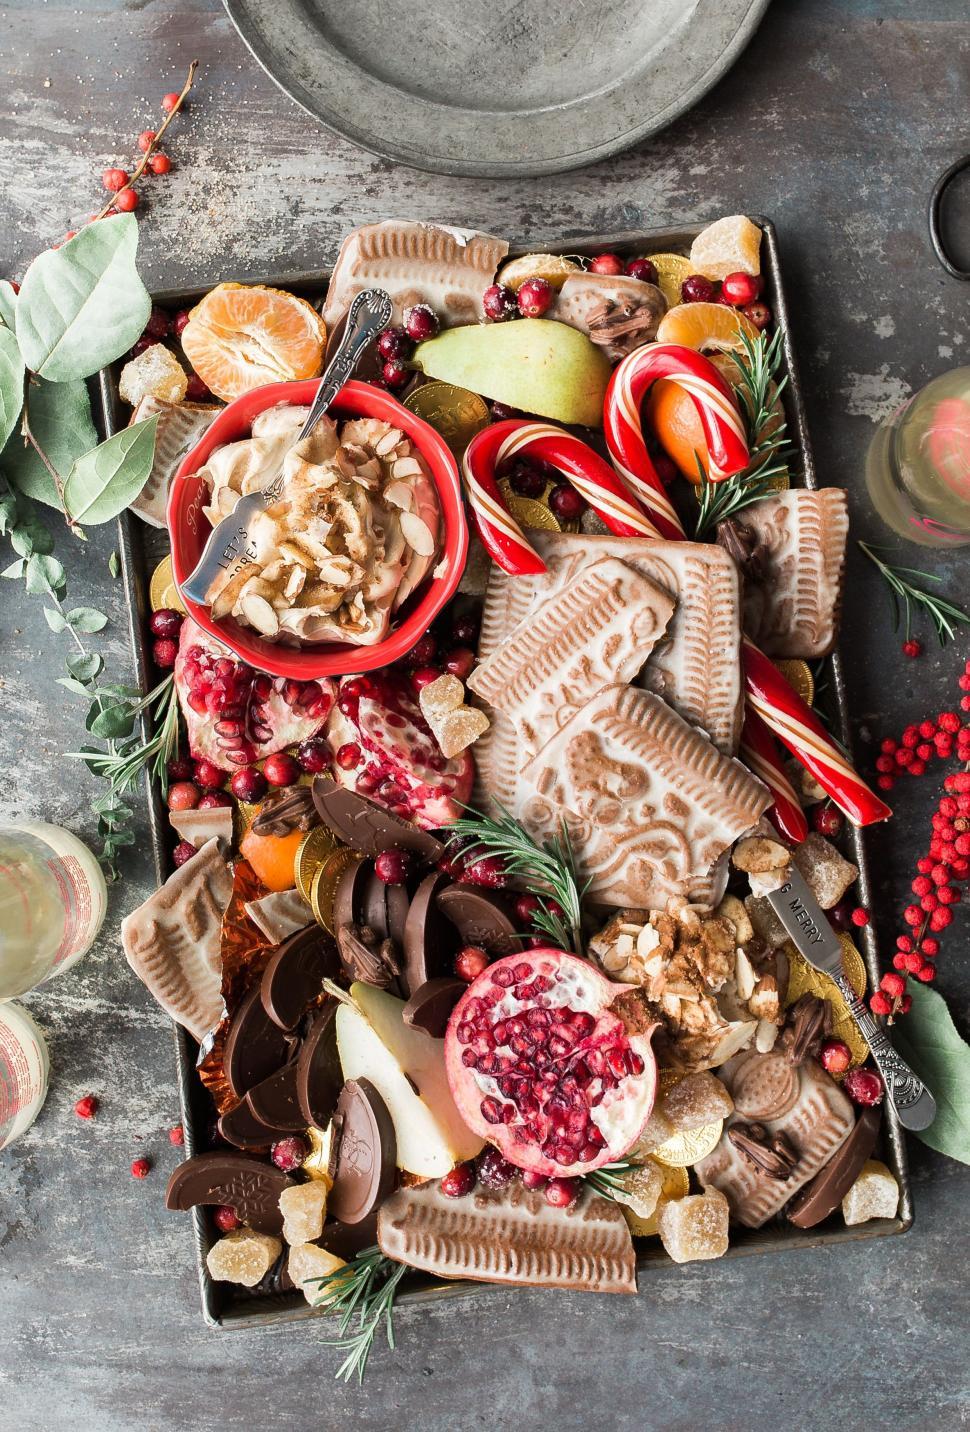 Free Image of Platter Filled With Christmas Treats and Candy Canes 